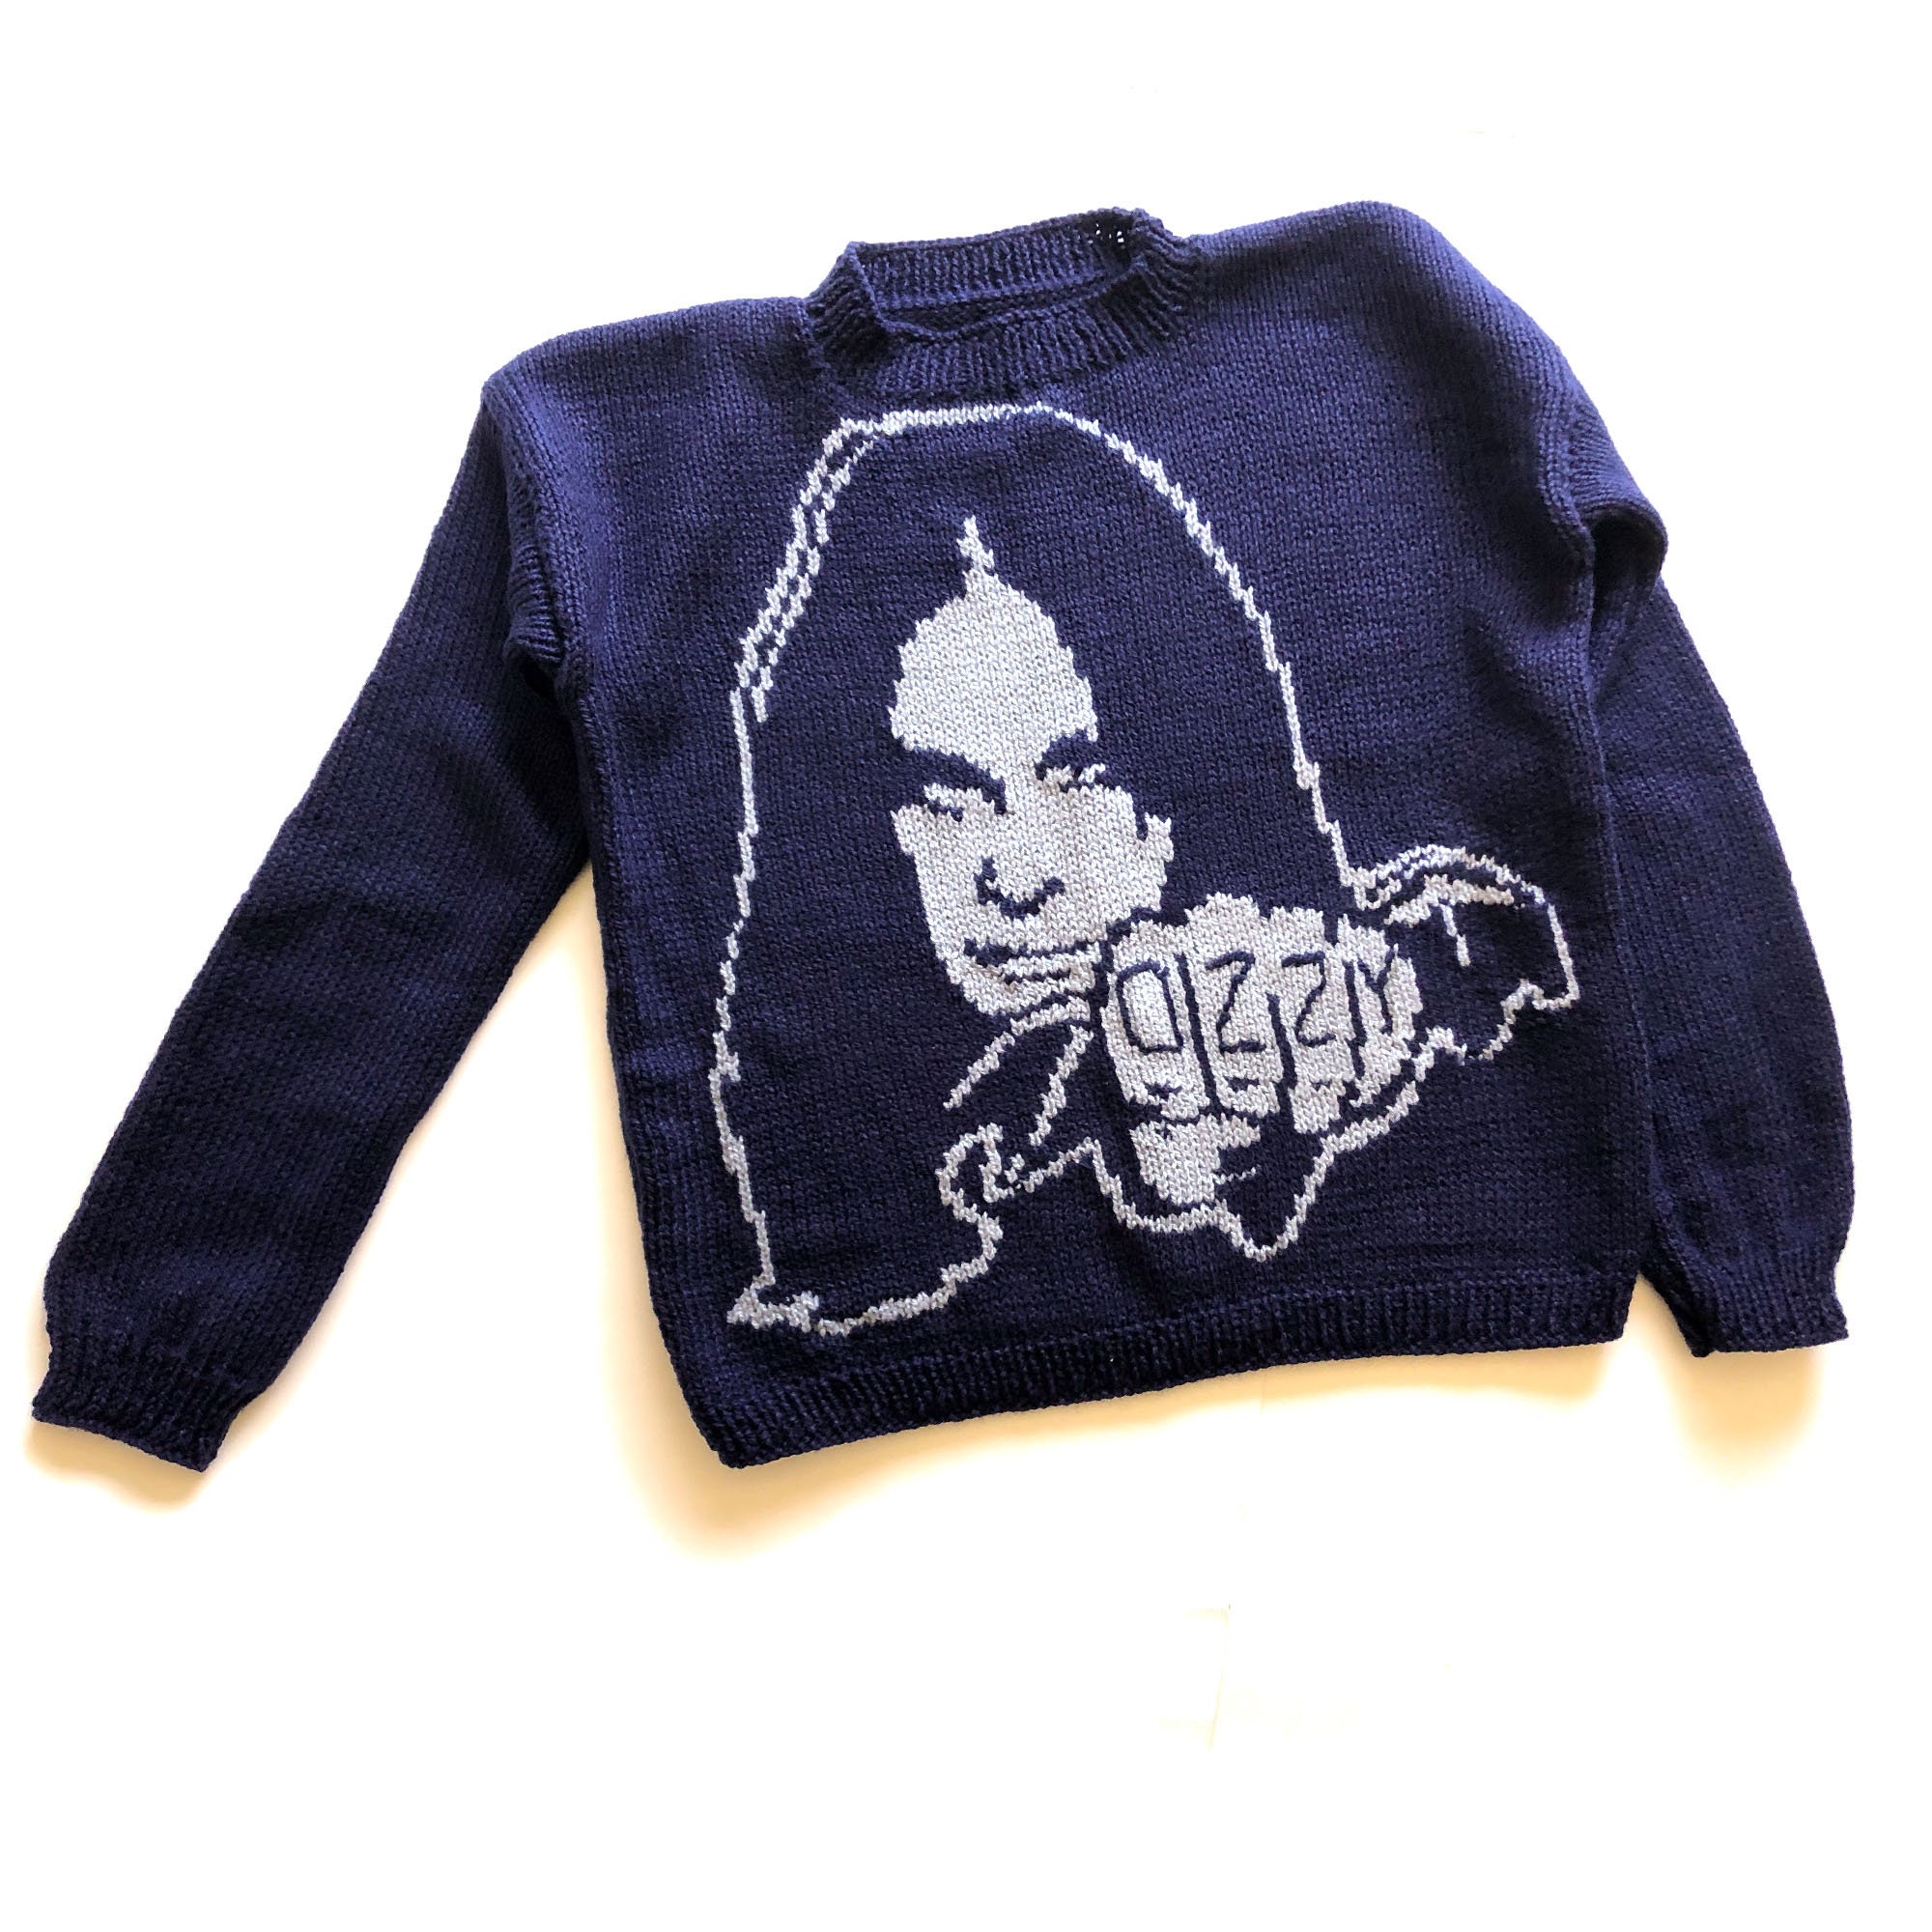 Made to order unisex and oversized sweater handmade with chilean wool Intarsia jumper with an exclusive design for the music fans